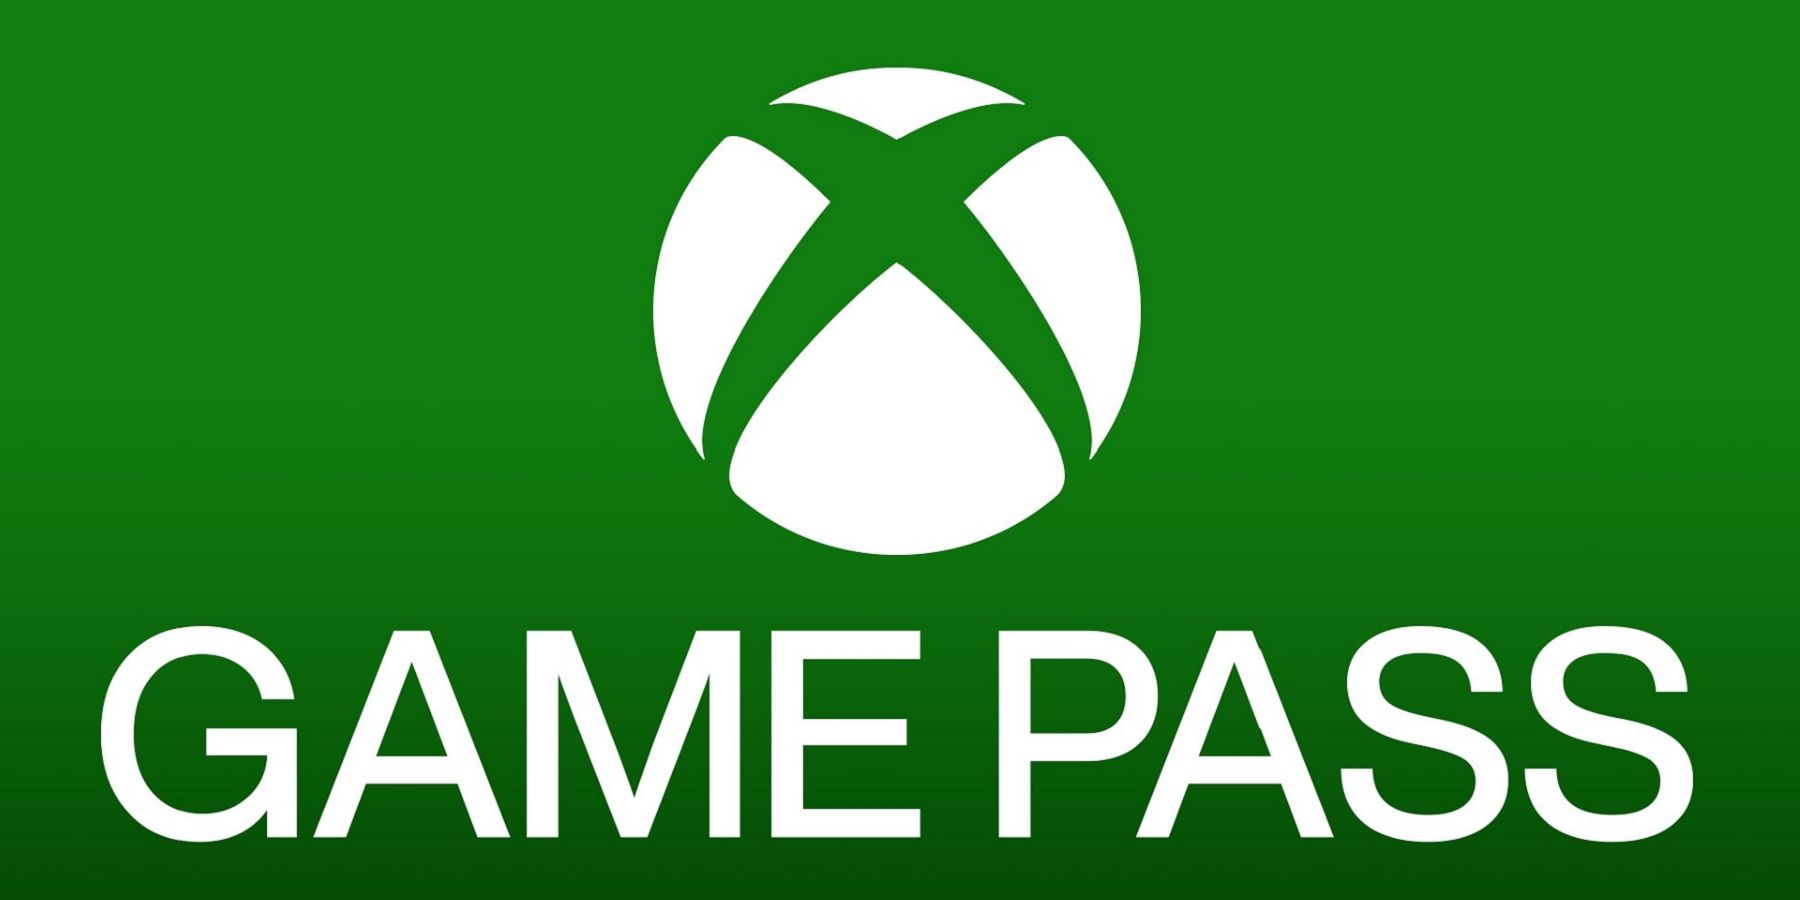 They're ADDING all the Games to the GAME PASS in February.. 🤯 #Xbox #